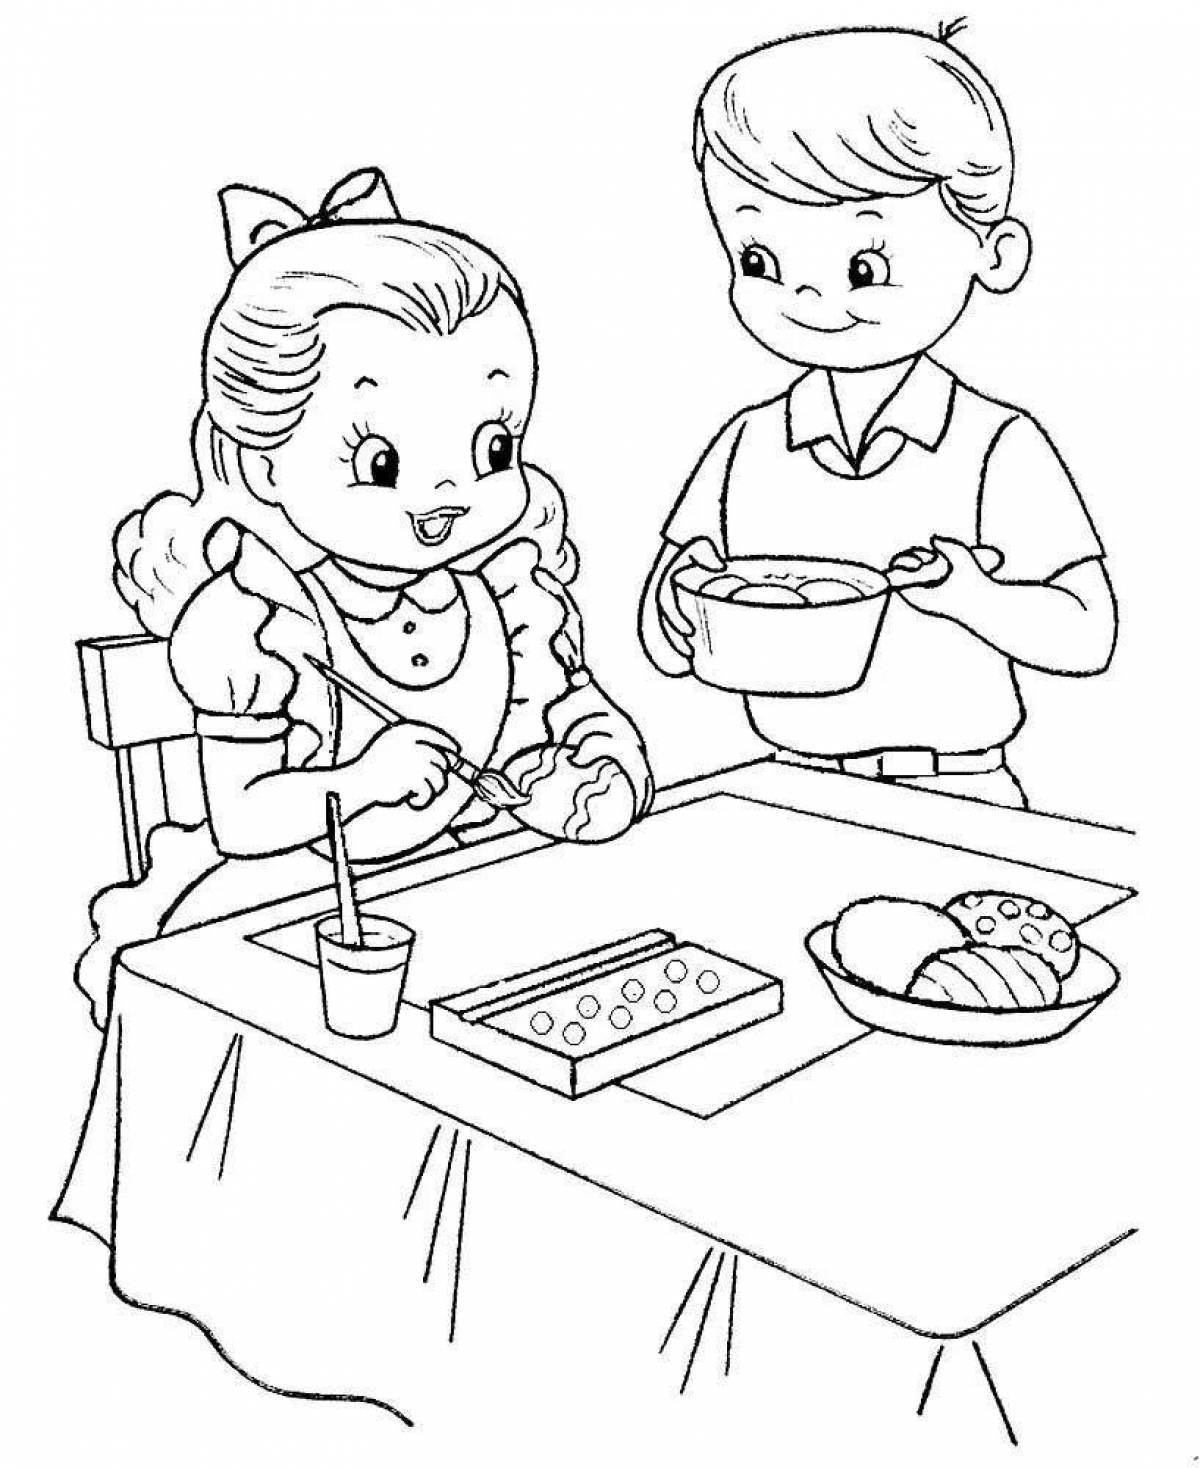 Etiquette for children 6 7 years old #17